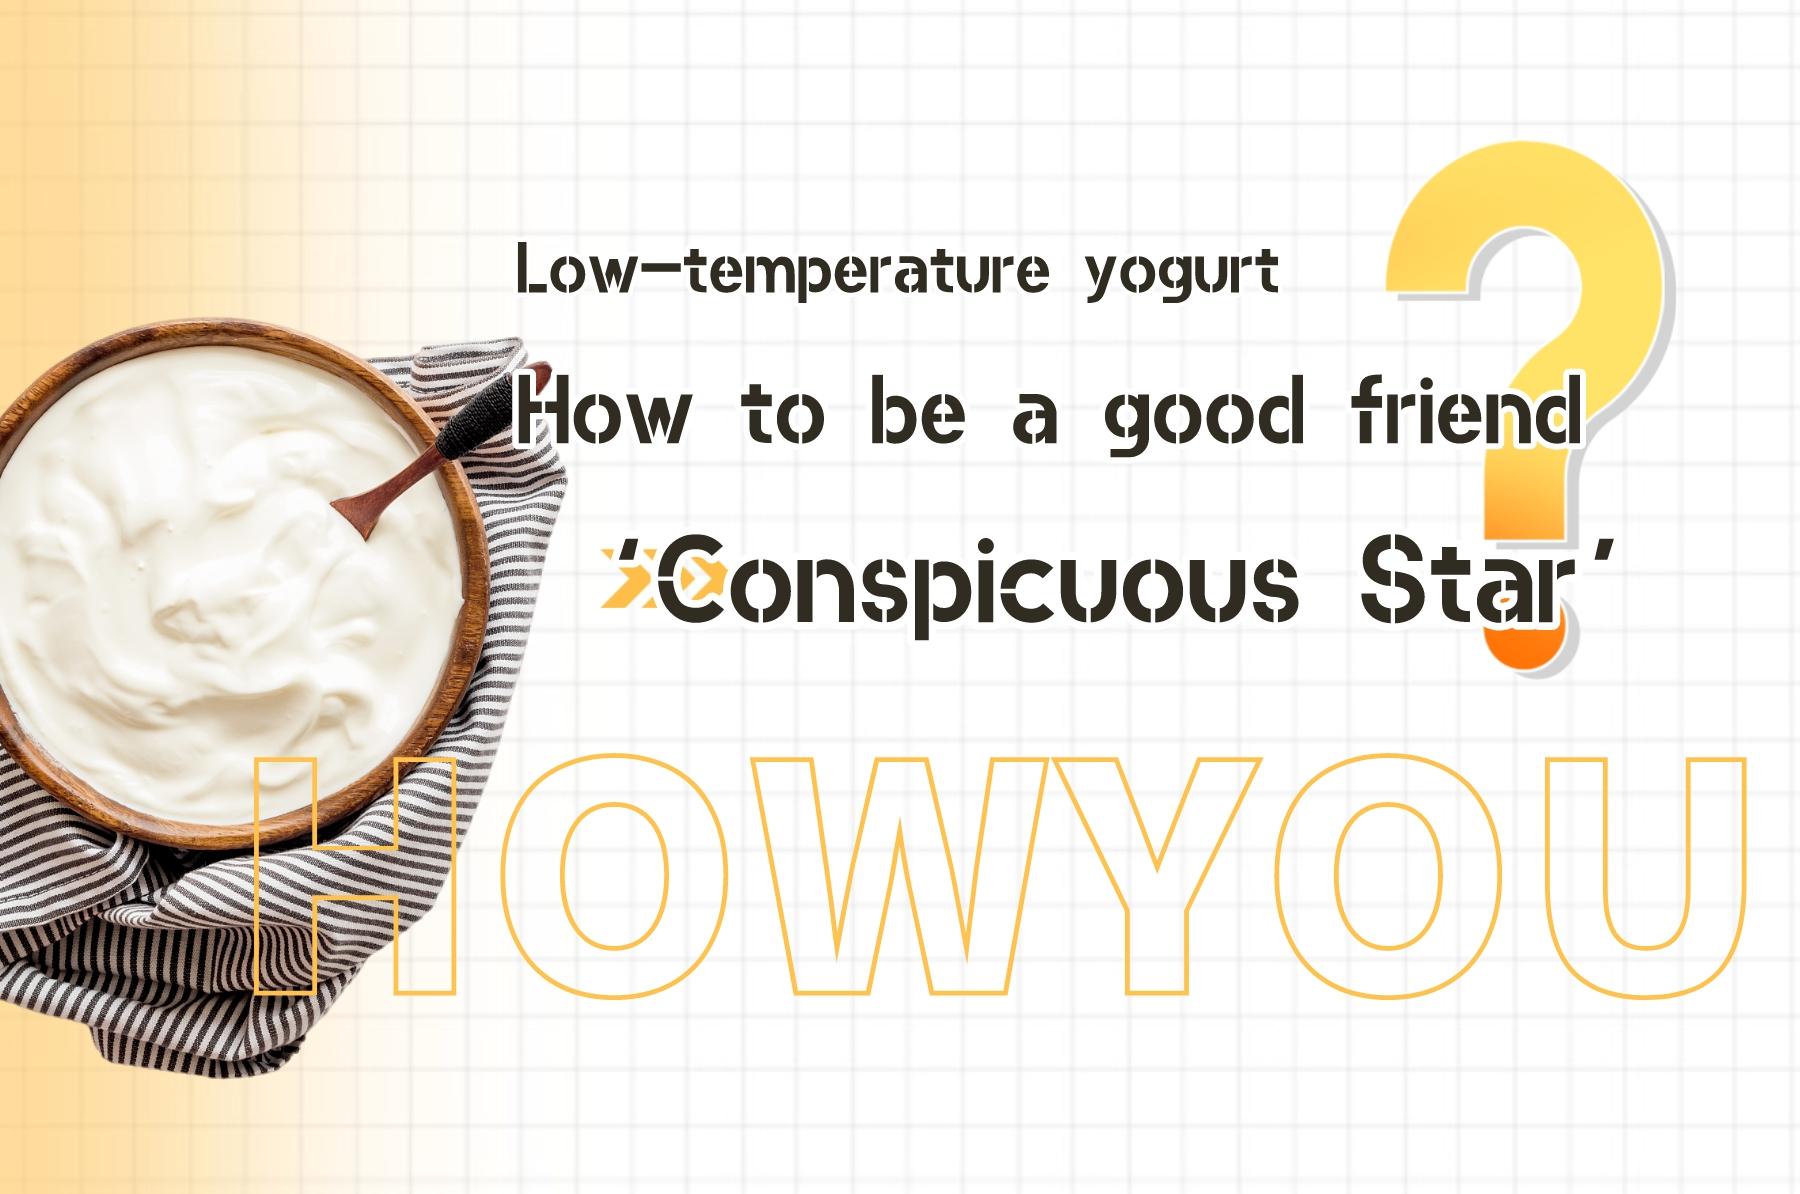 Low-temperature yoghurt stands out